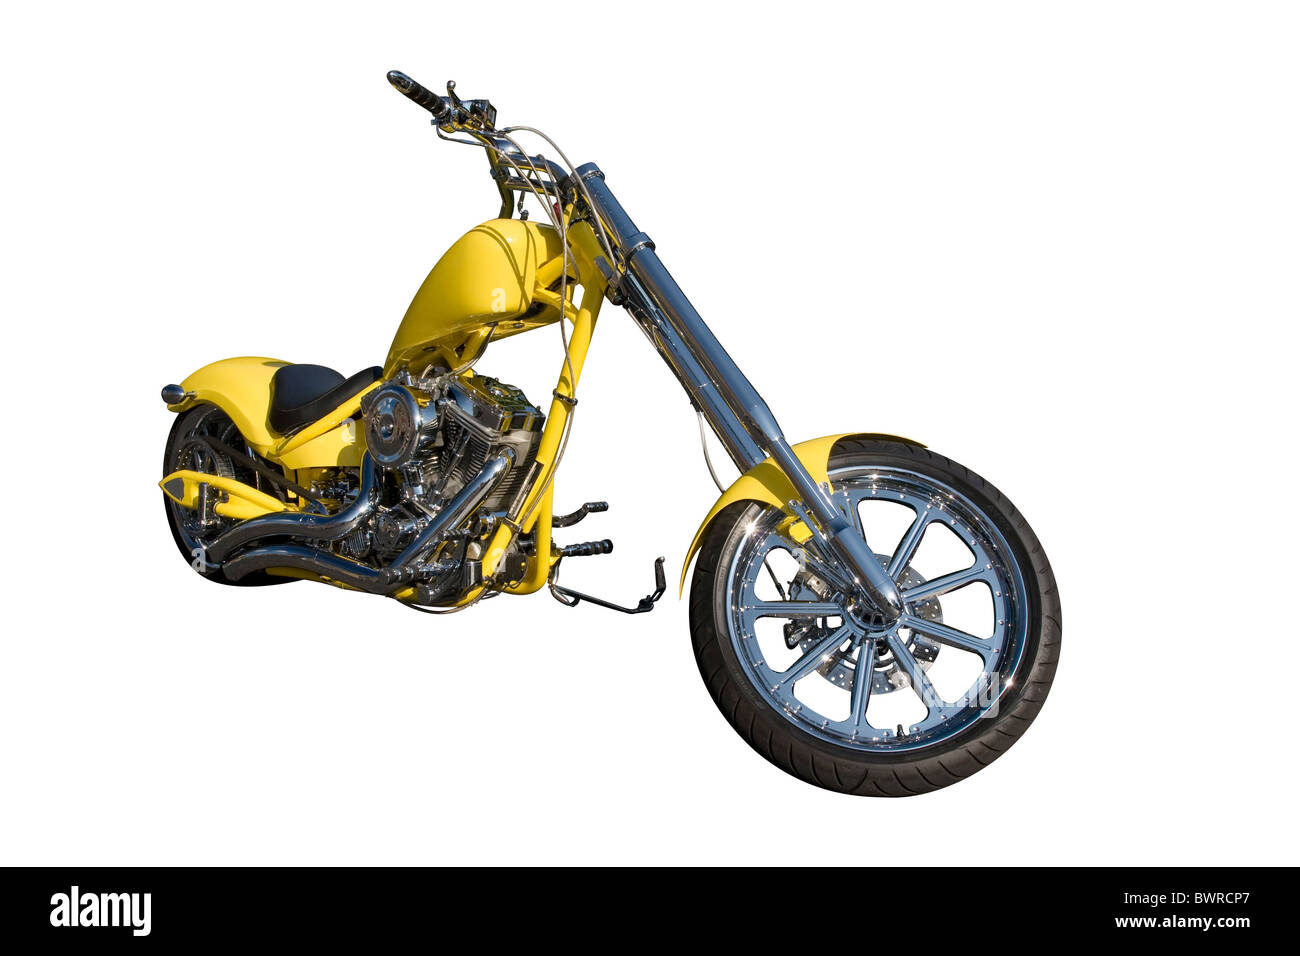 Chopper Motorcycles for sale in Steins, New Mexico